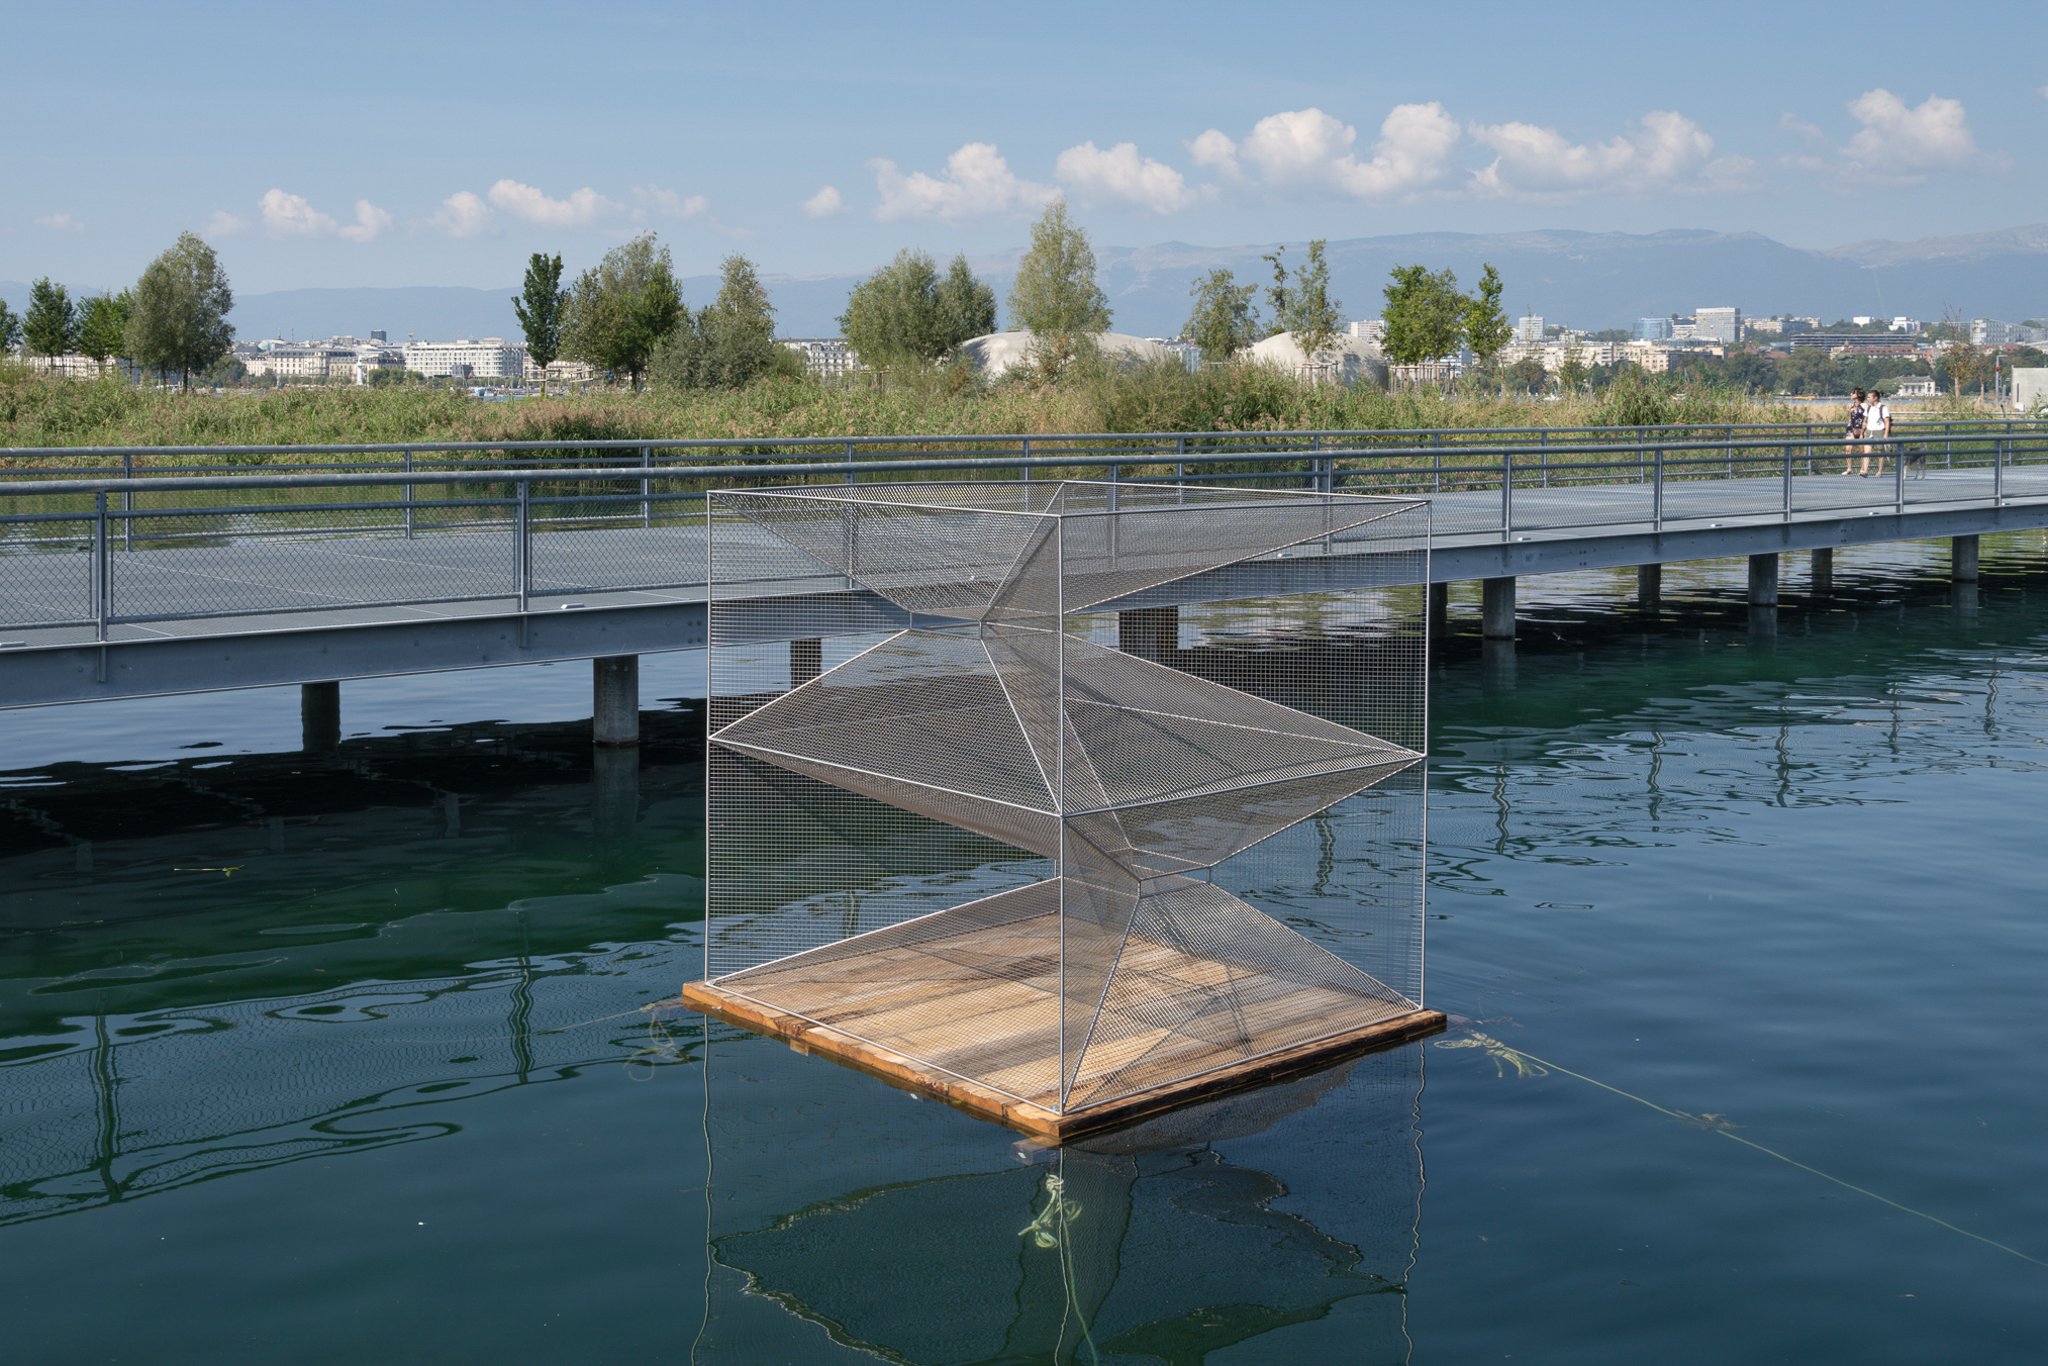 reconnecting.earth, the biennal of art and urban nature - Geneva, nomadic exhibition and education program